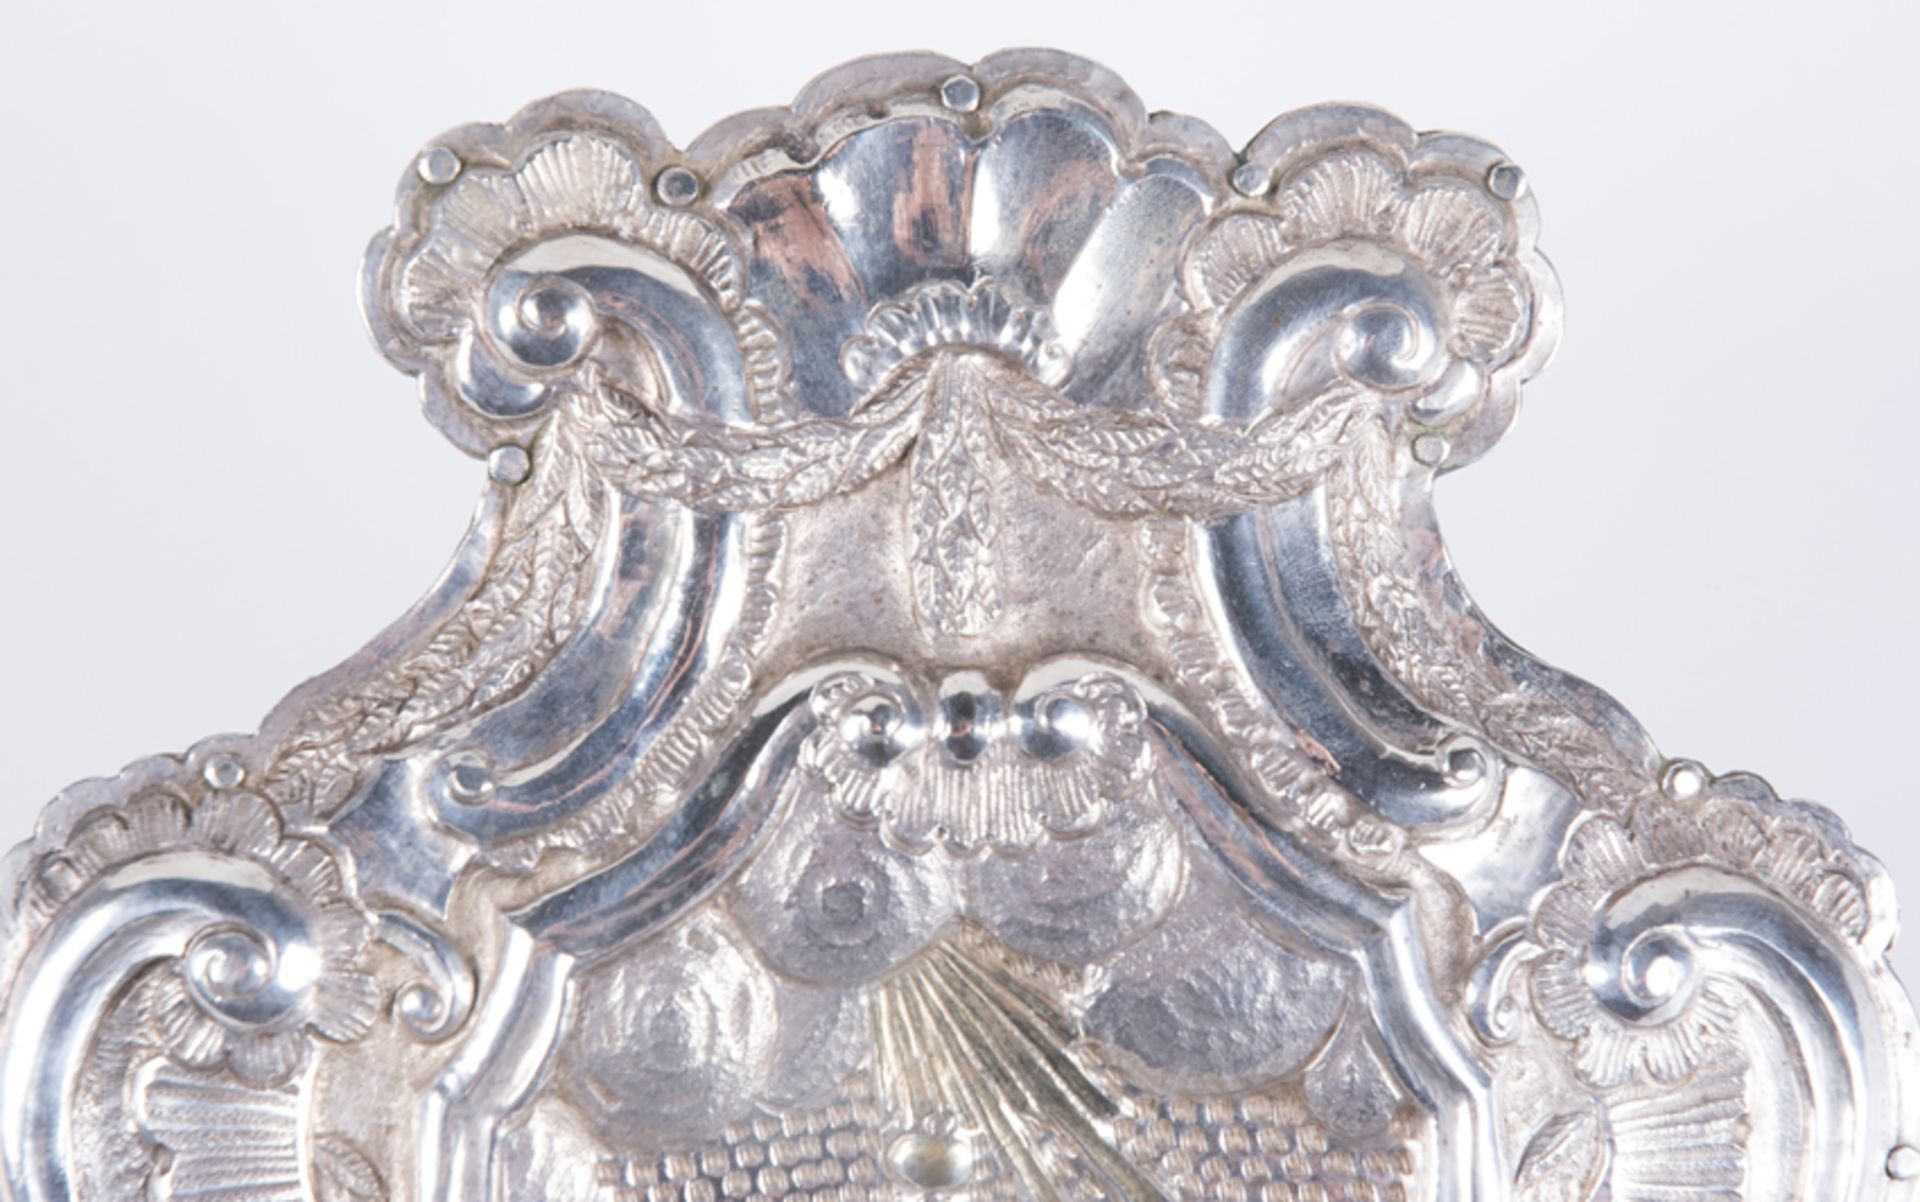 Silver and silver gilt pax board. 18th century. Dated 1786. - Image 3 of 7